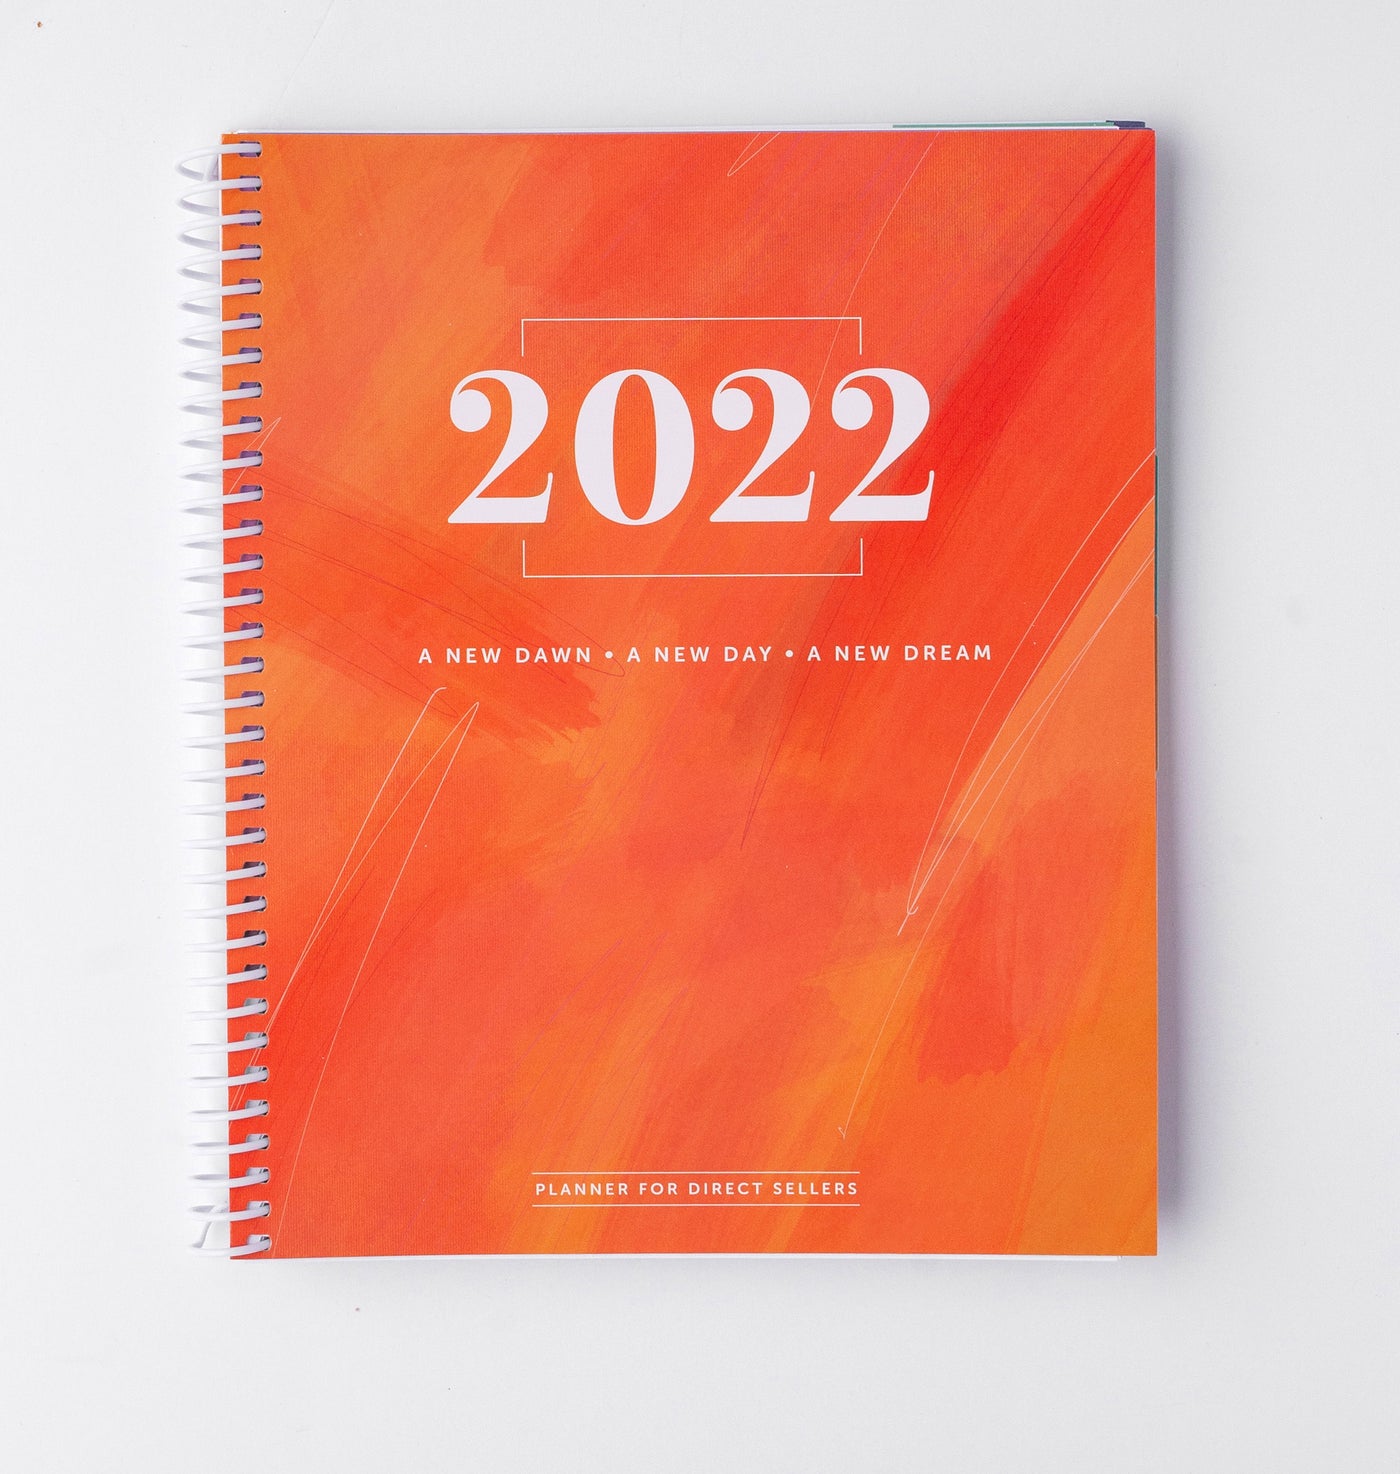 Bulk 2022 Planners 10 or More $250 ($25.00 each)